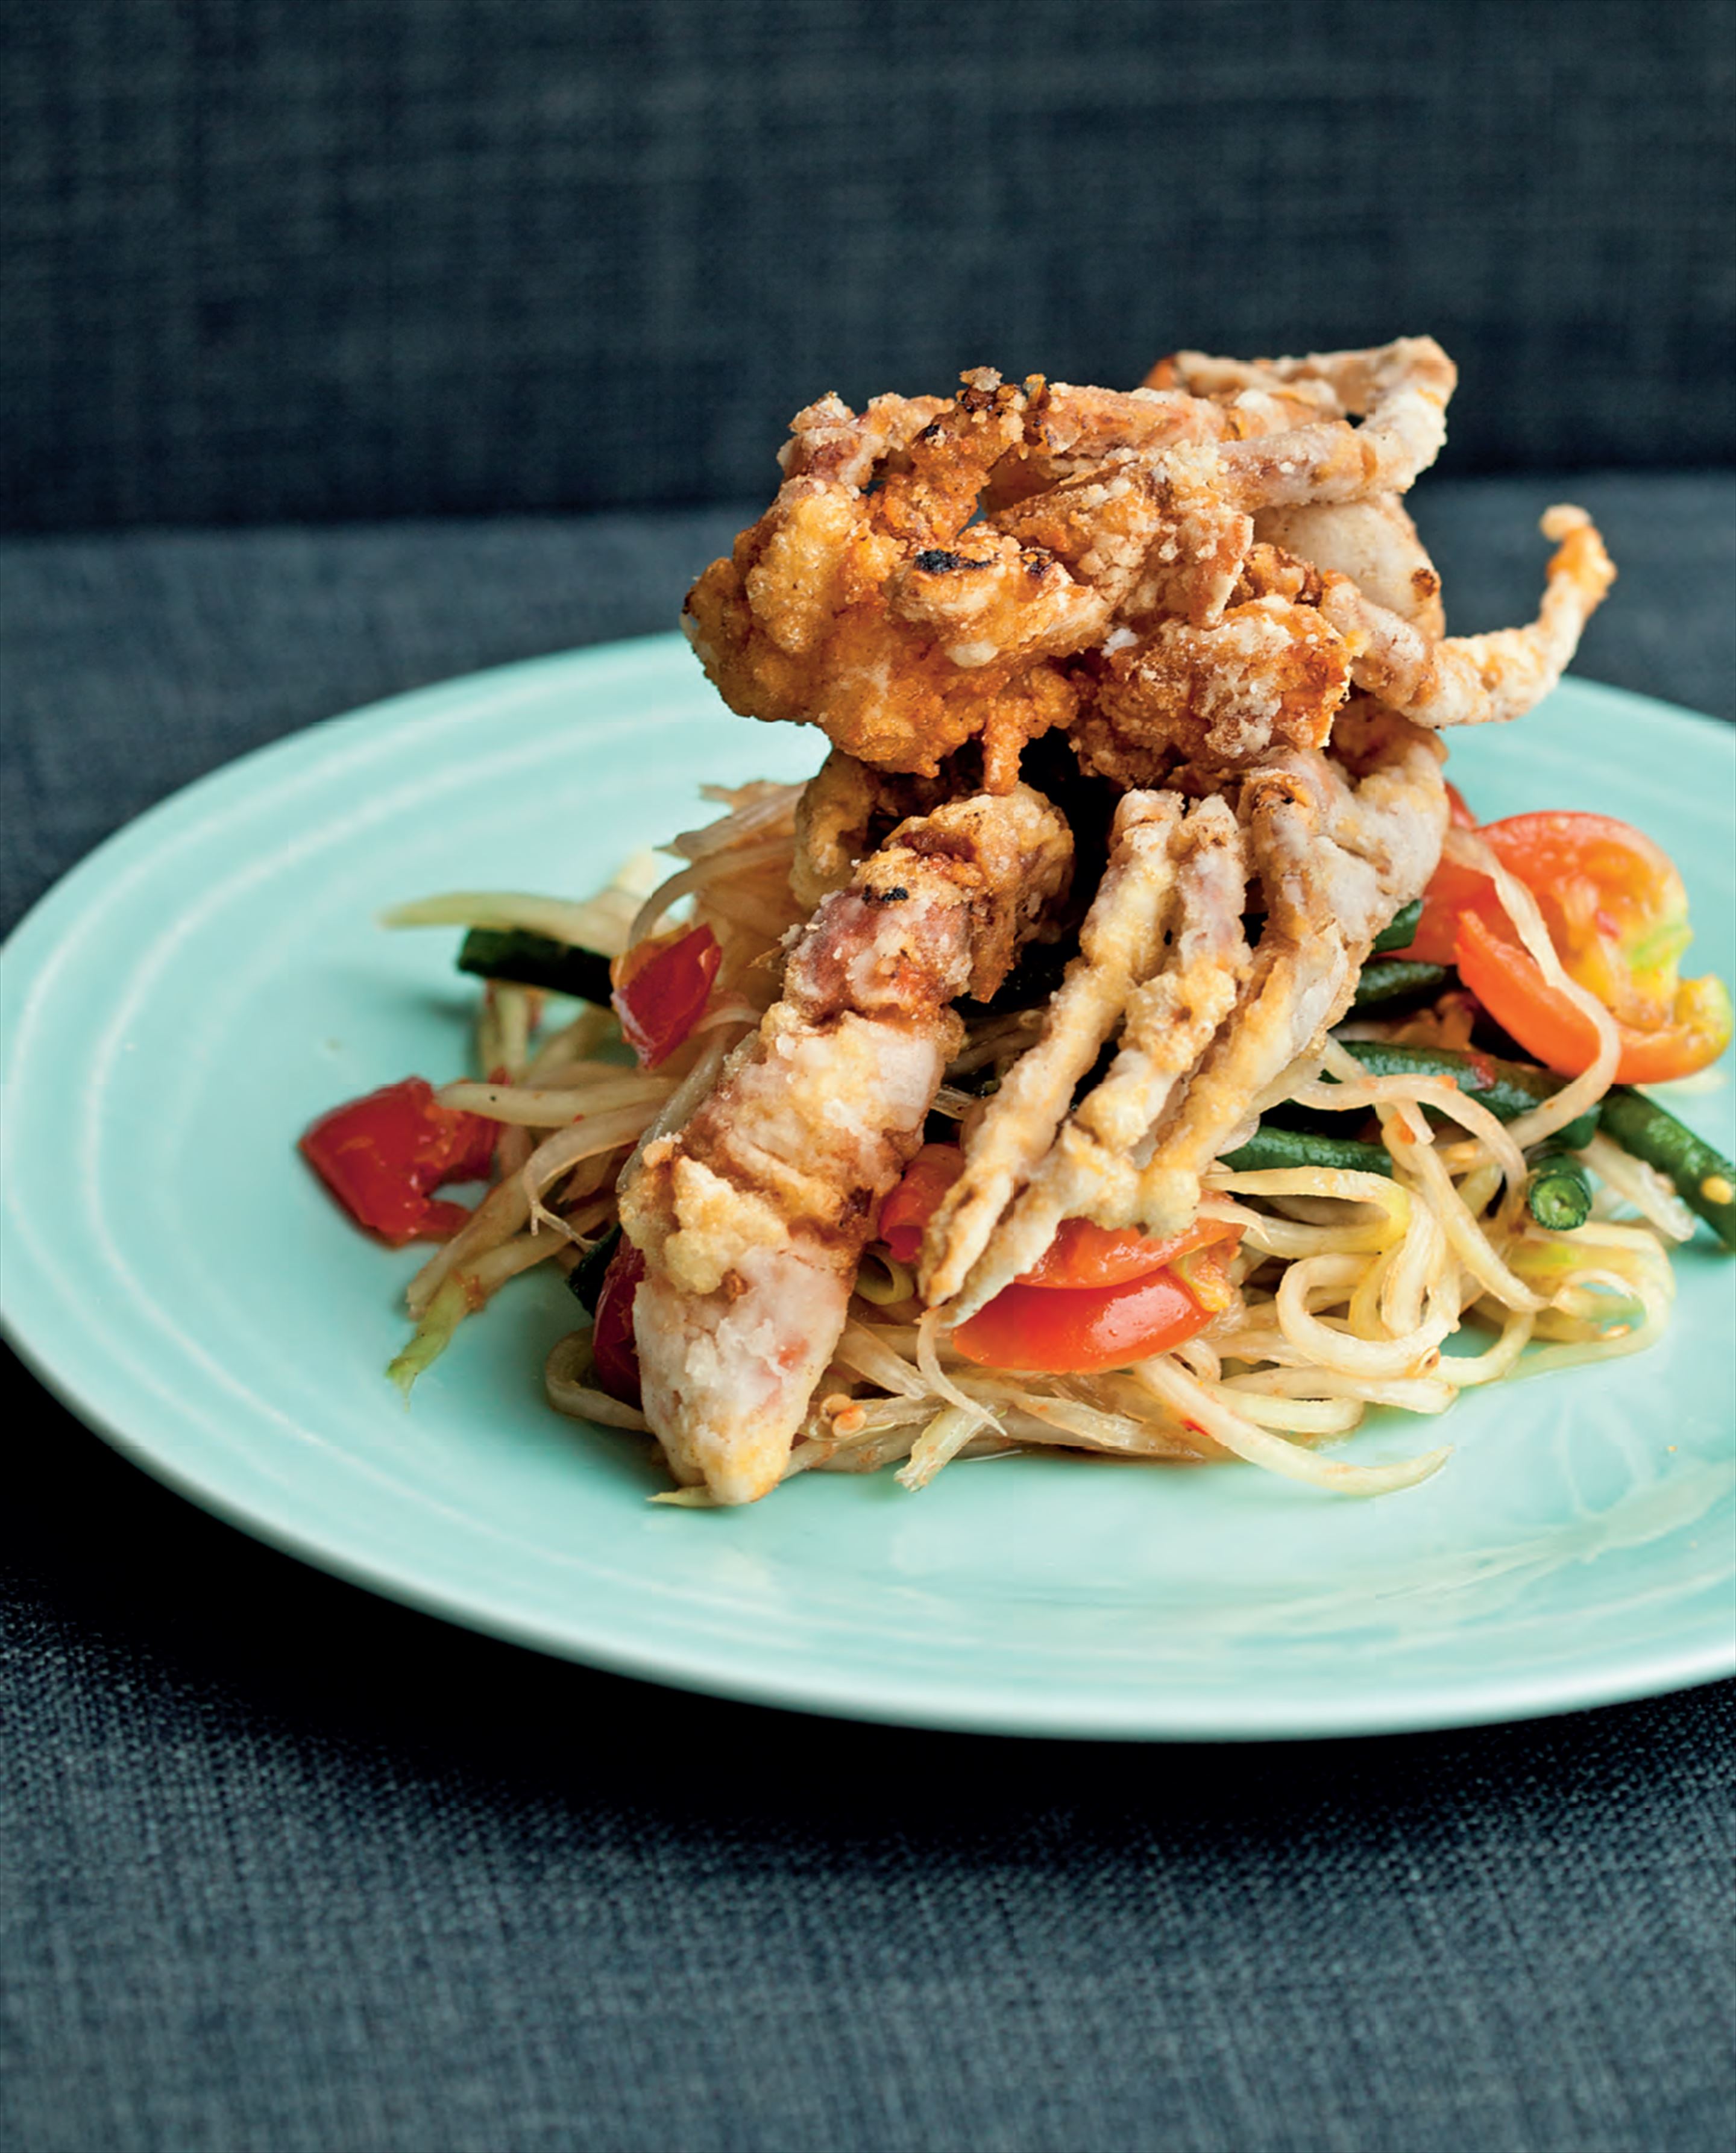 Deep-fried soft shell crab with som tum